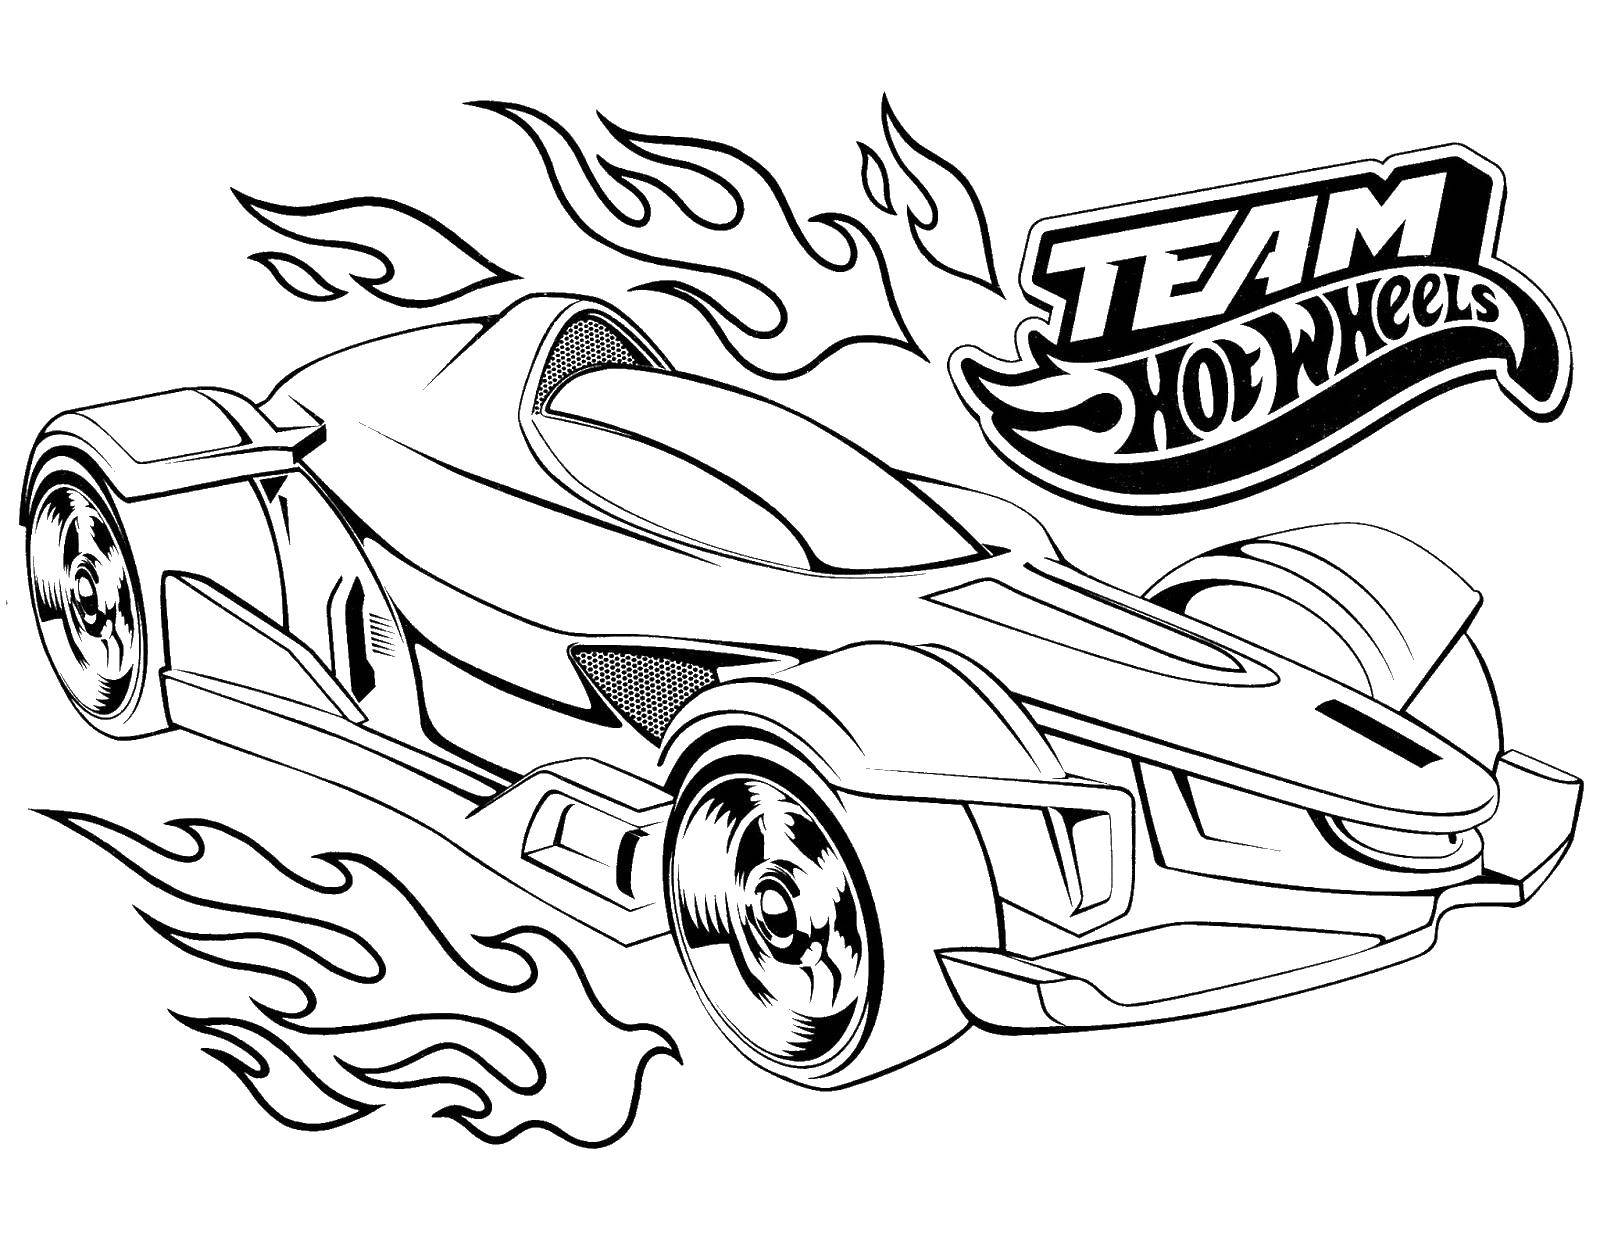 Coloring Racing car. Category Machine . Tags:  Transport, car.